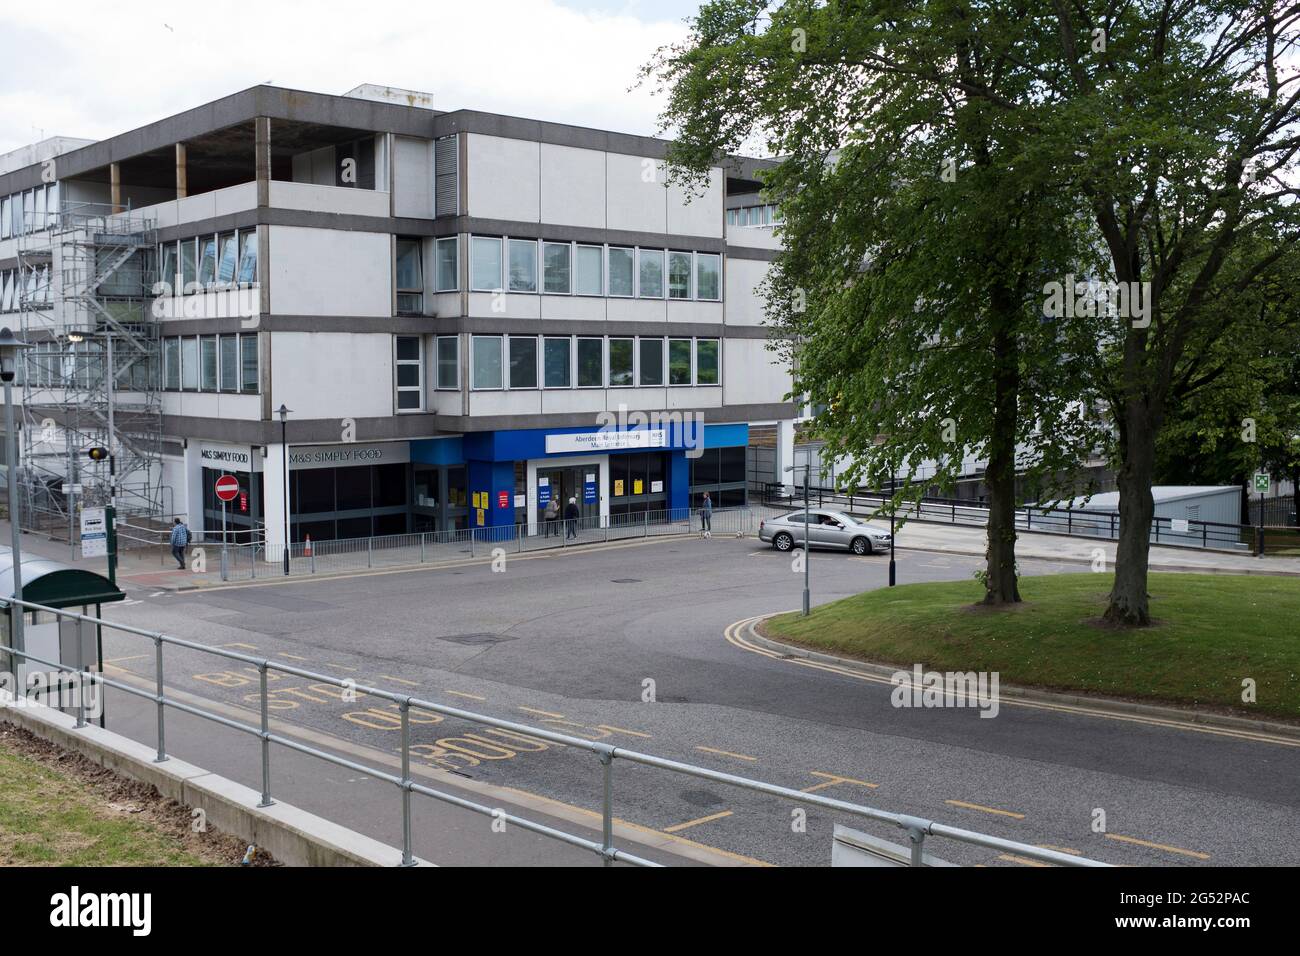 dh Front entrance ARI HOSPITAL ABERDEEN Royal infirmary scottish hospitals exterior building Stock Photo